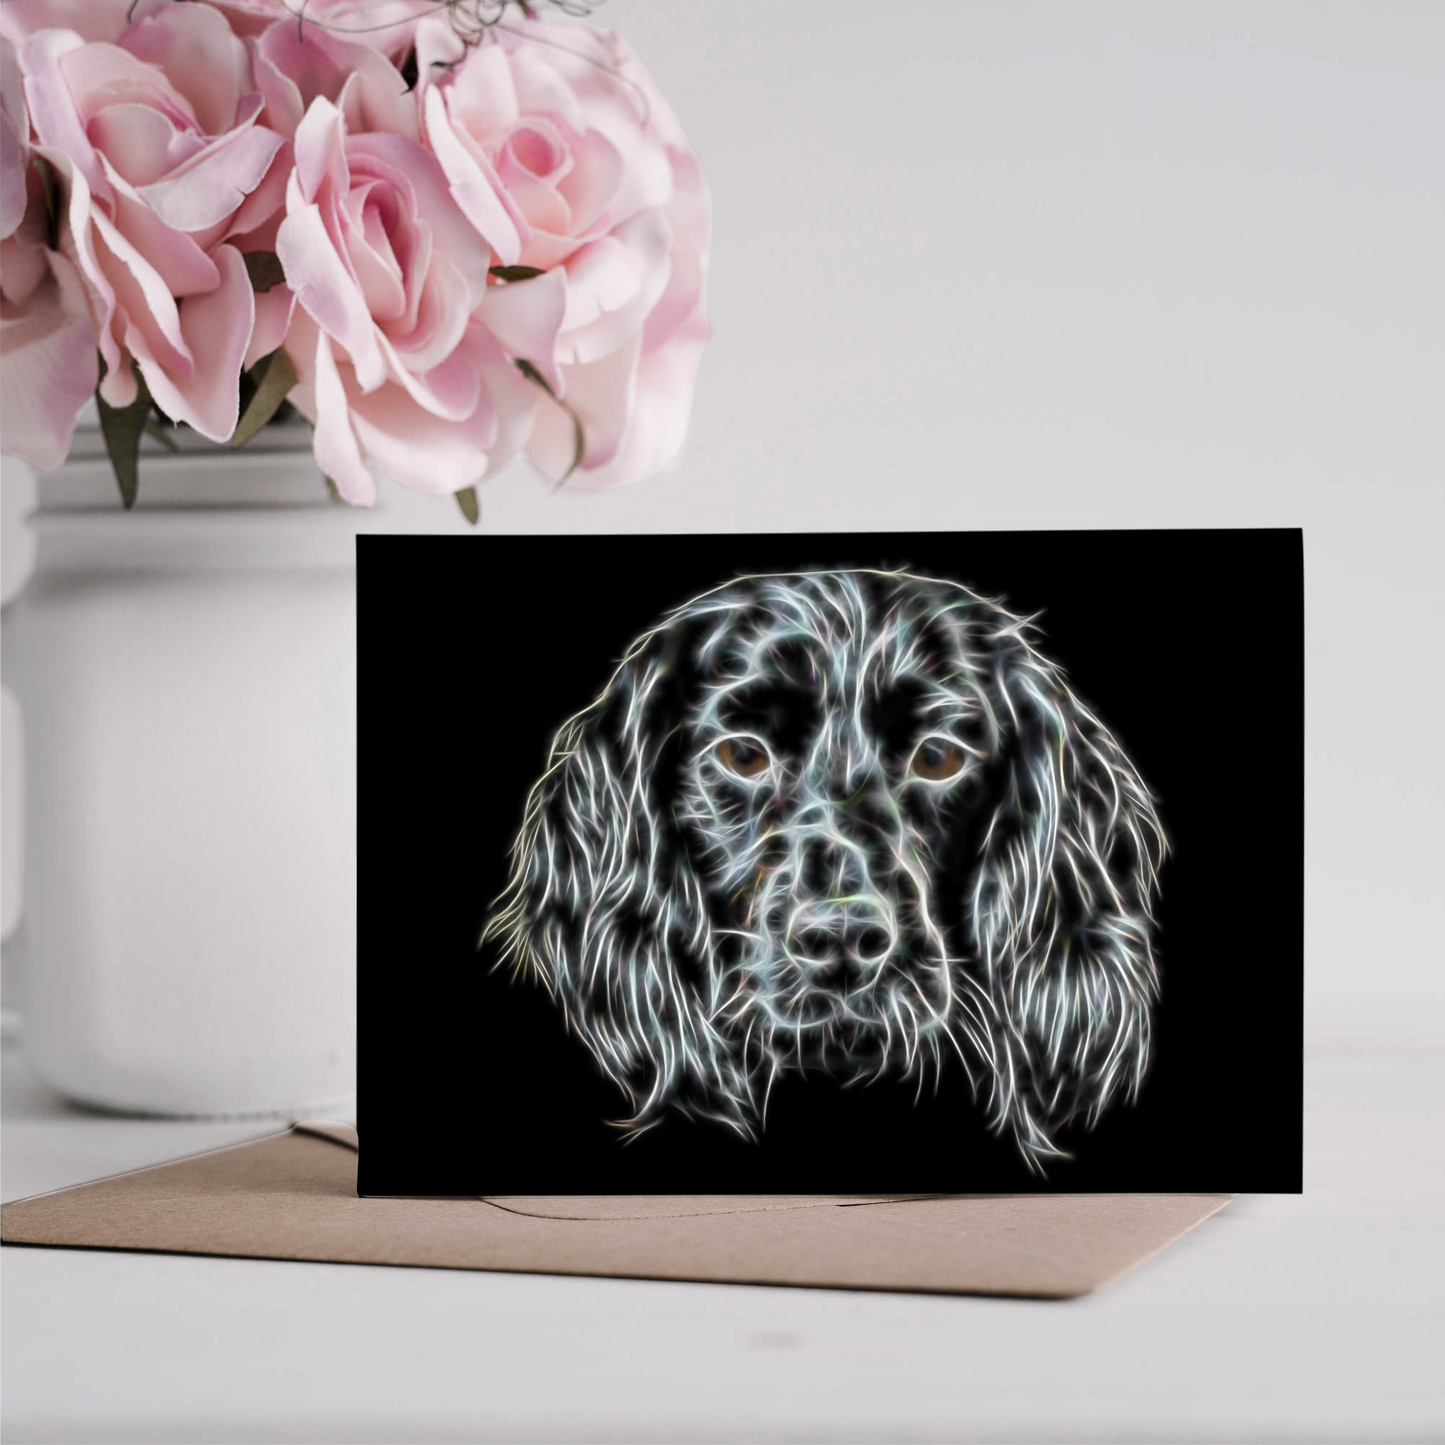 Sprocker Greeting Card Blank Inside for Birthdays or any other Occasion